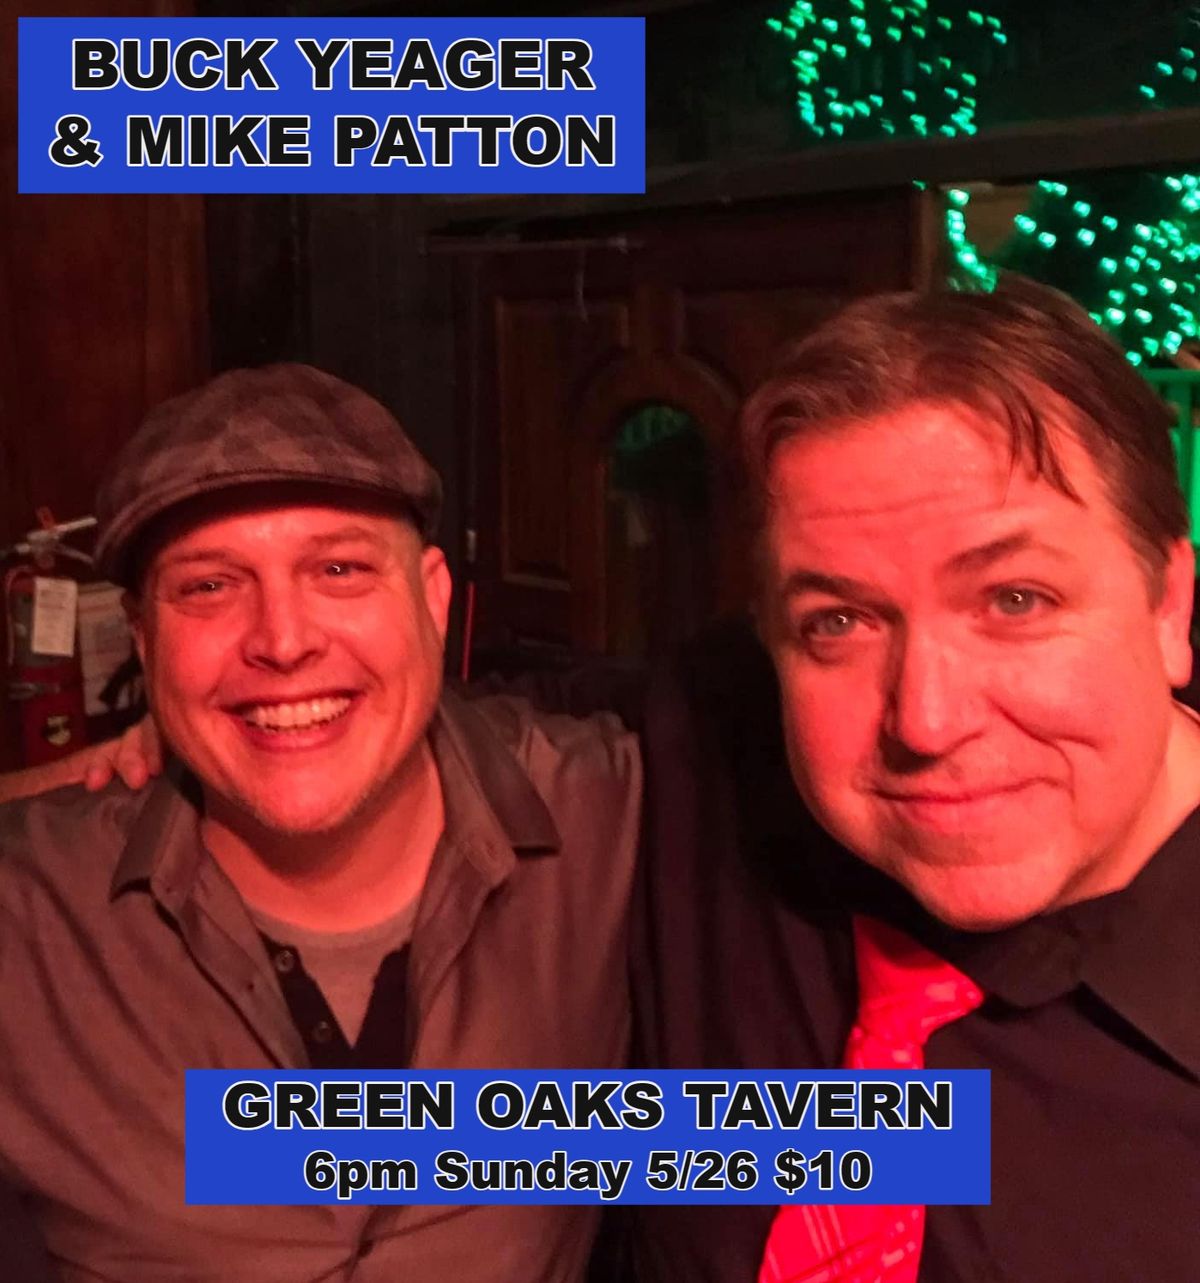 Buck Yeager & Mike Patton at Green Oaks Tavern